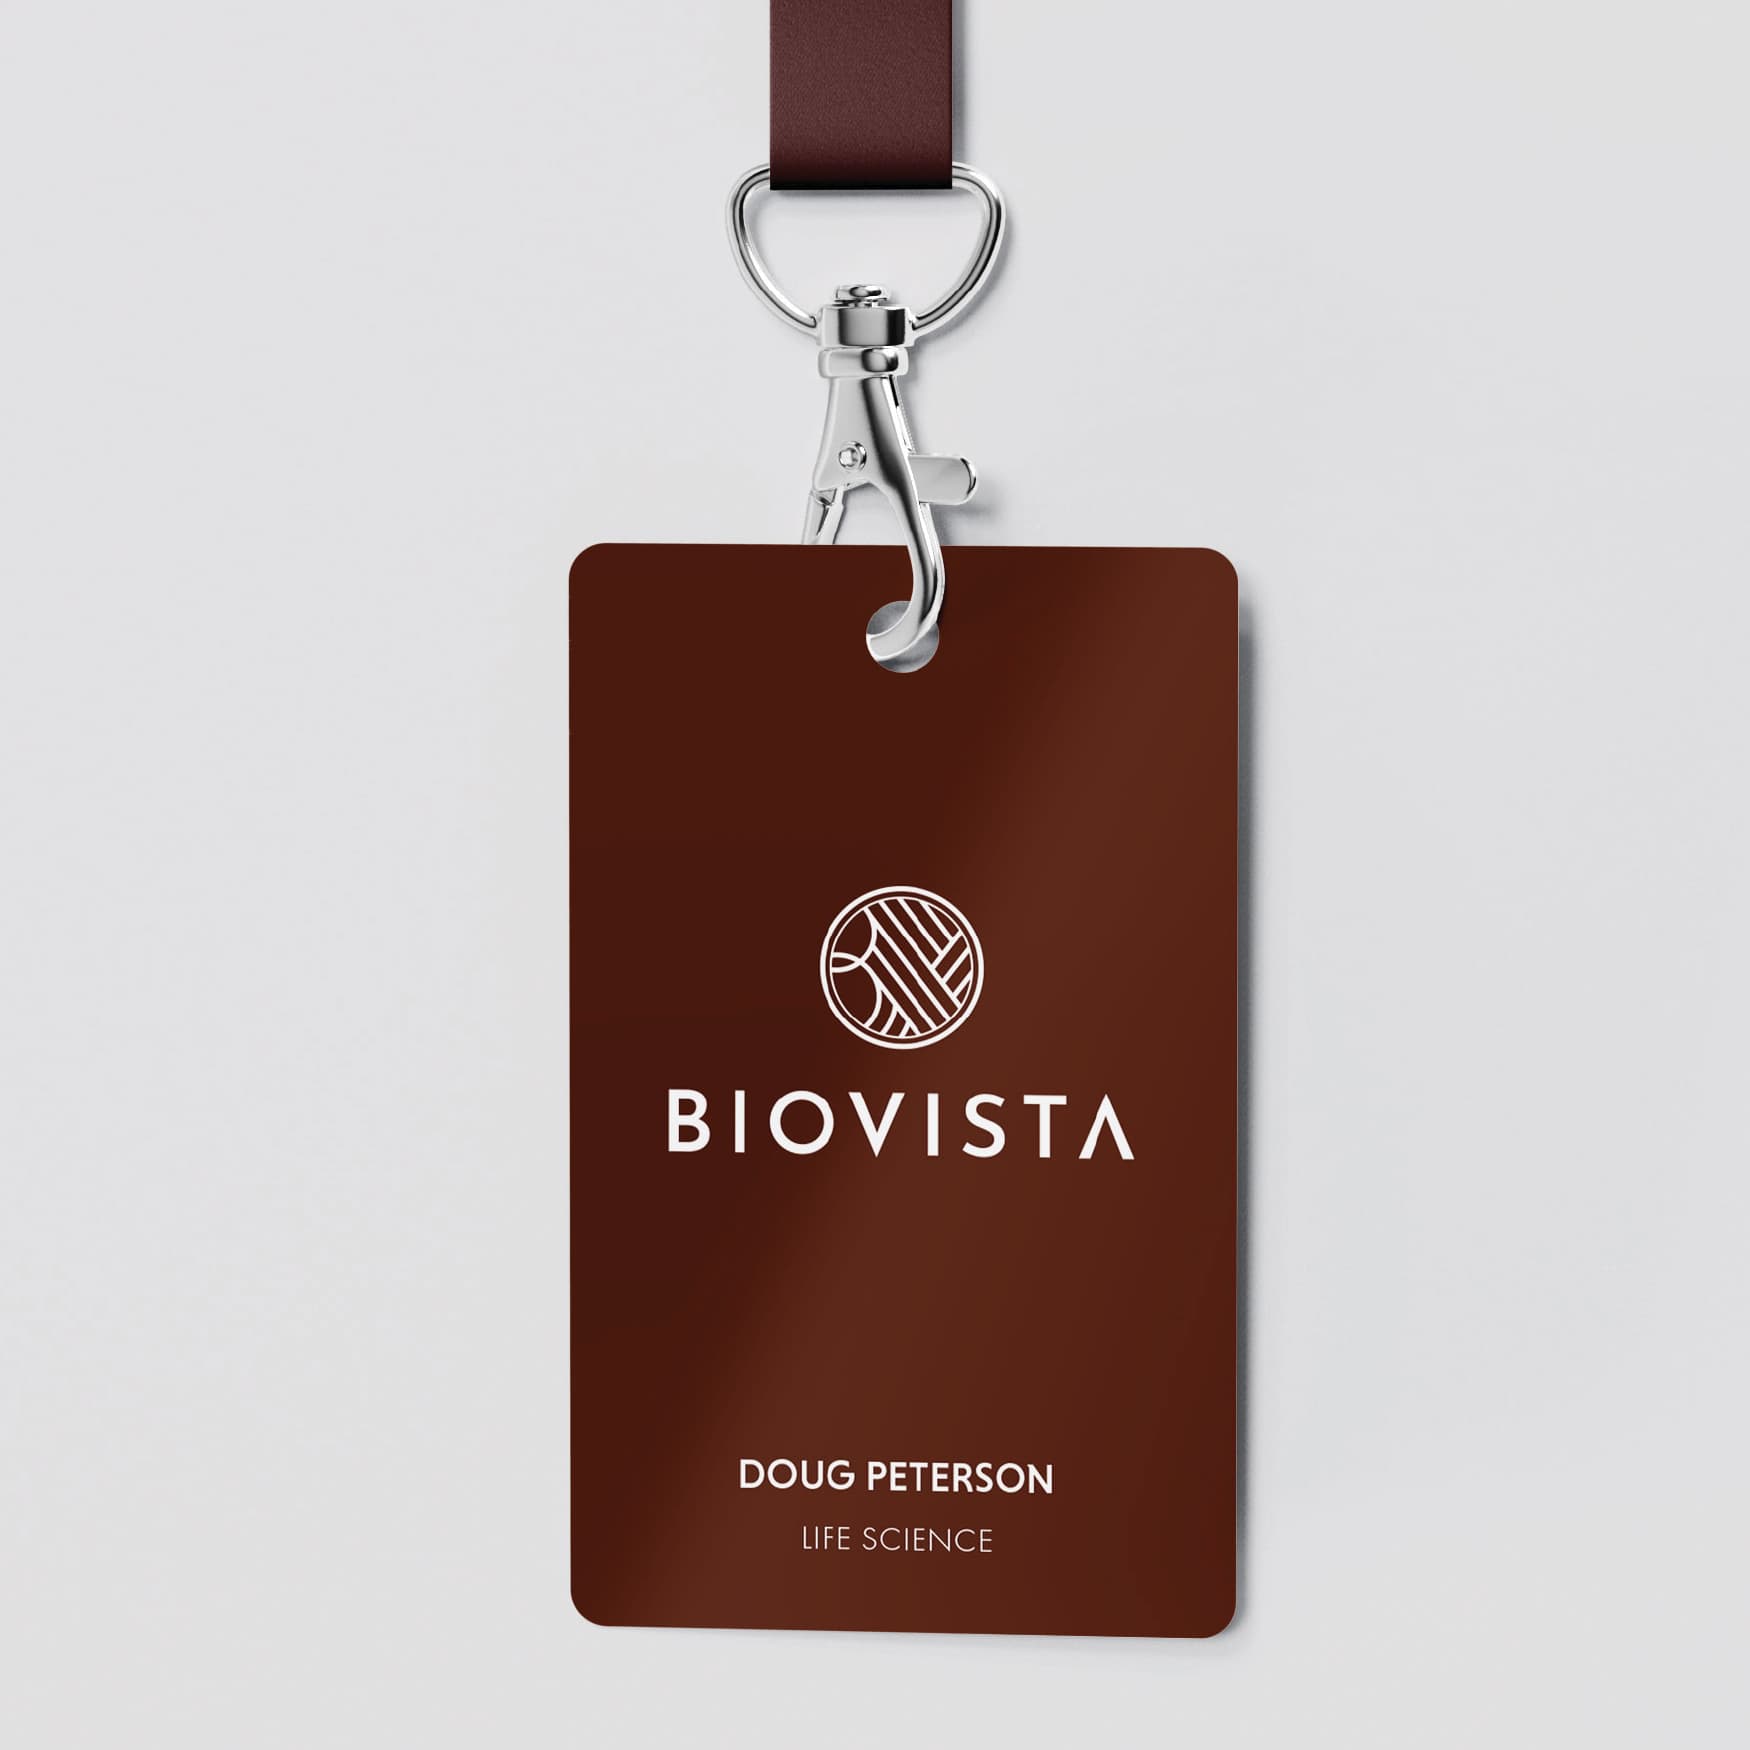 Biovista nametag for employees with the brand applied. 